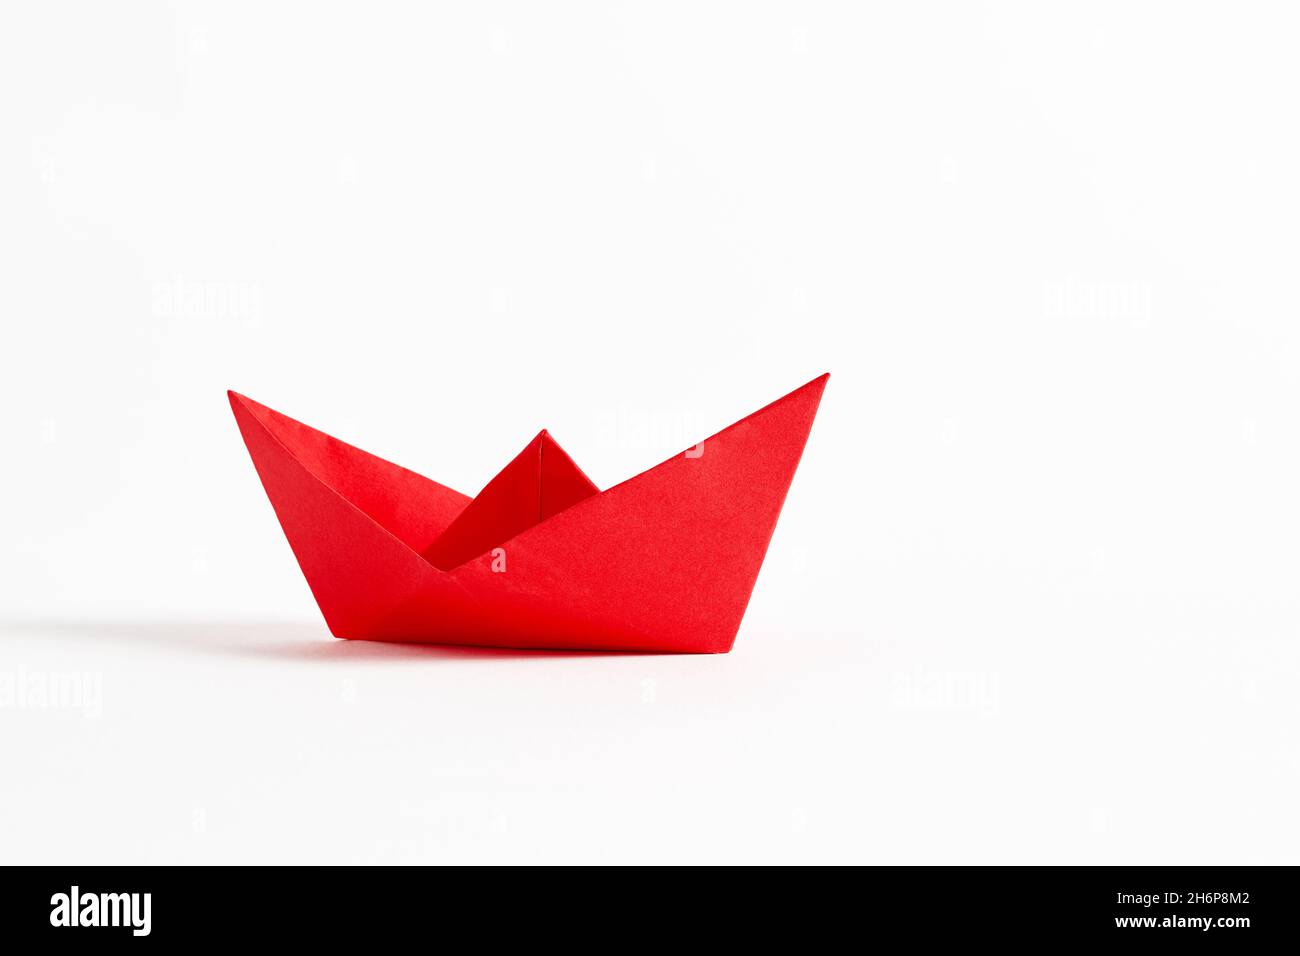 Origami red paper boat on white background. Stock Photo